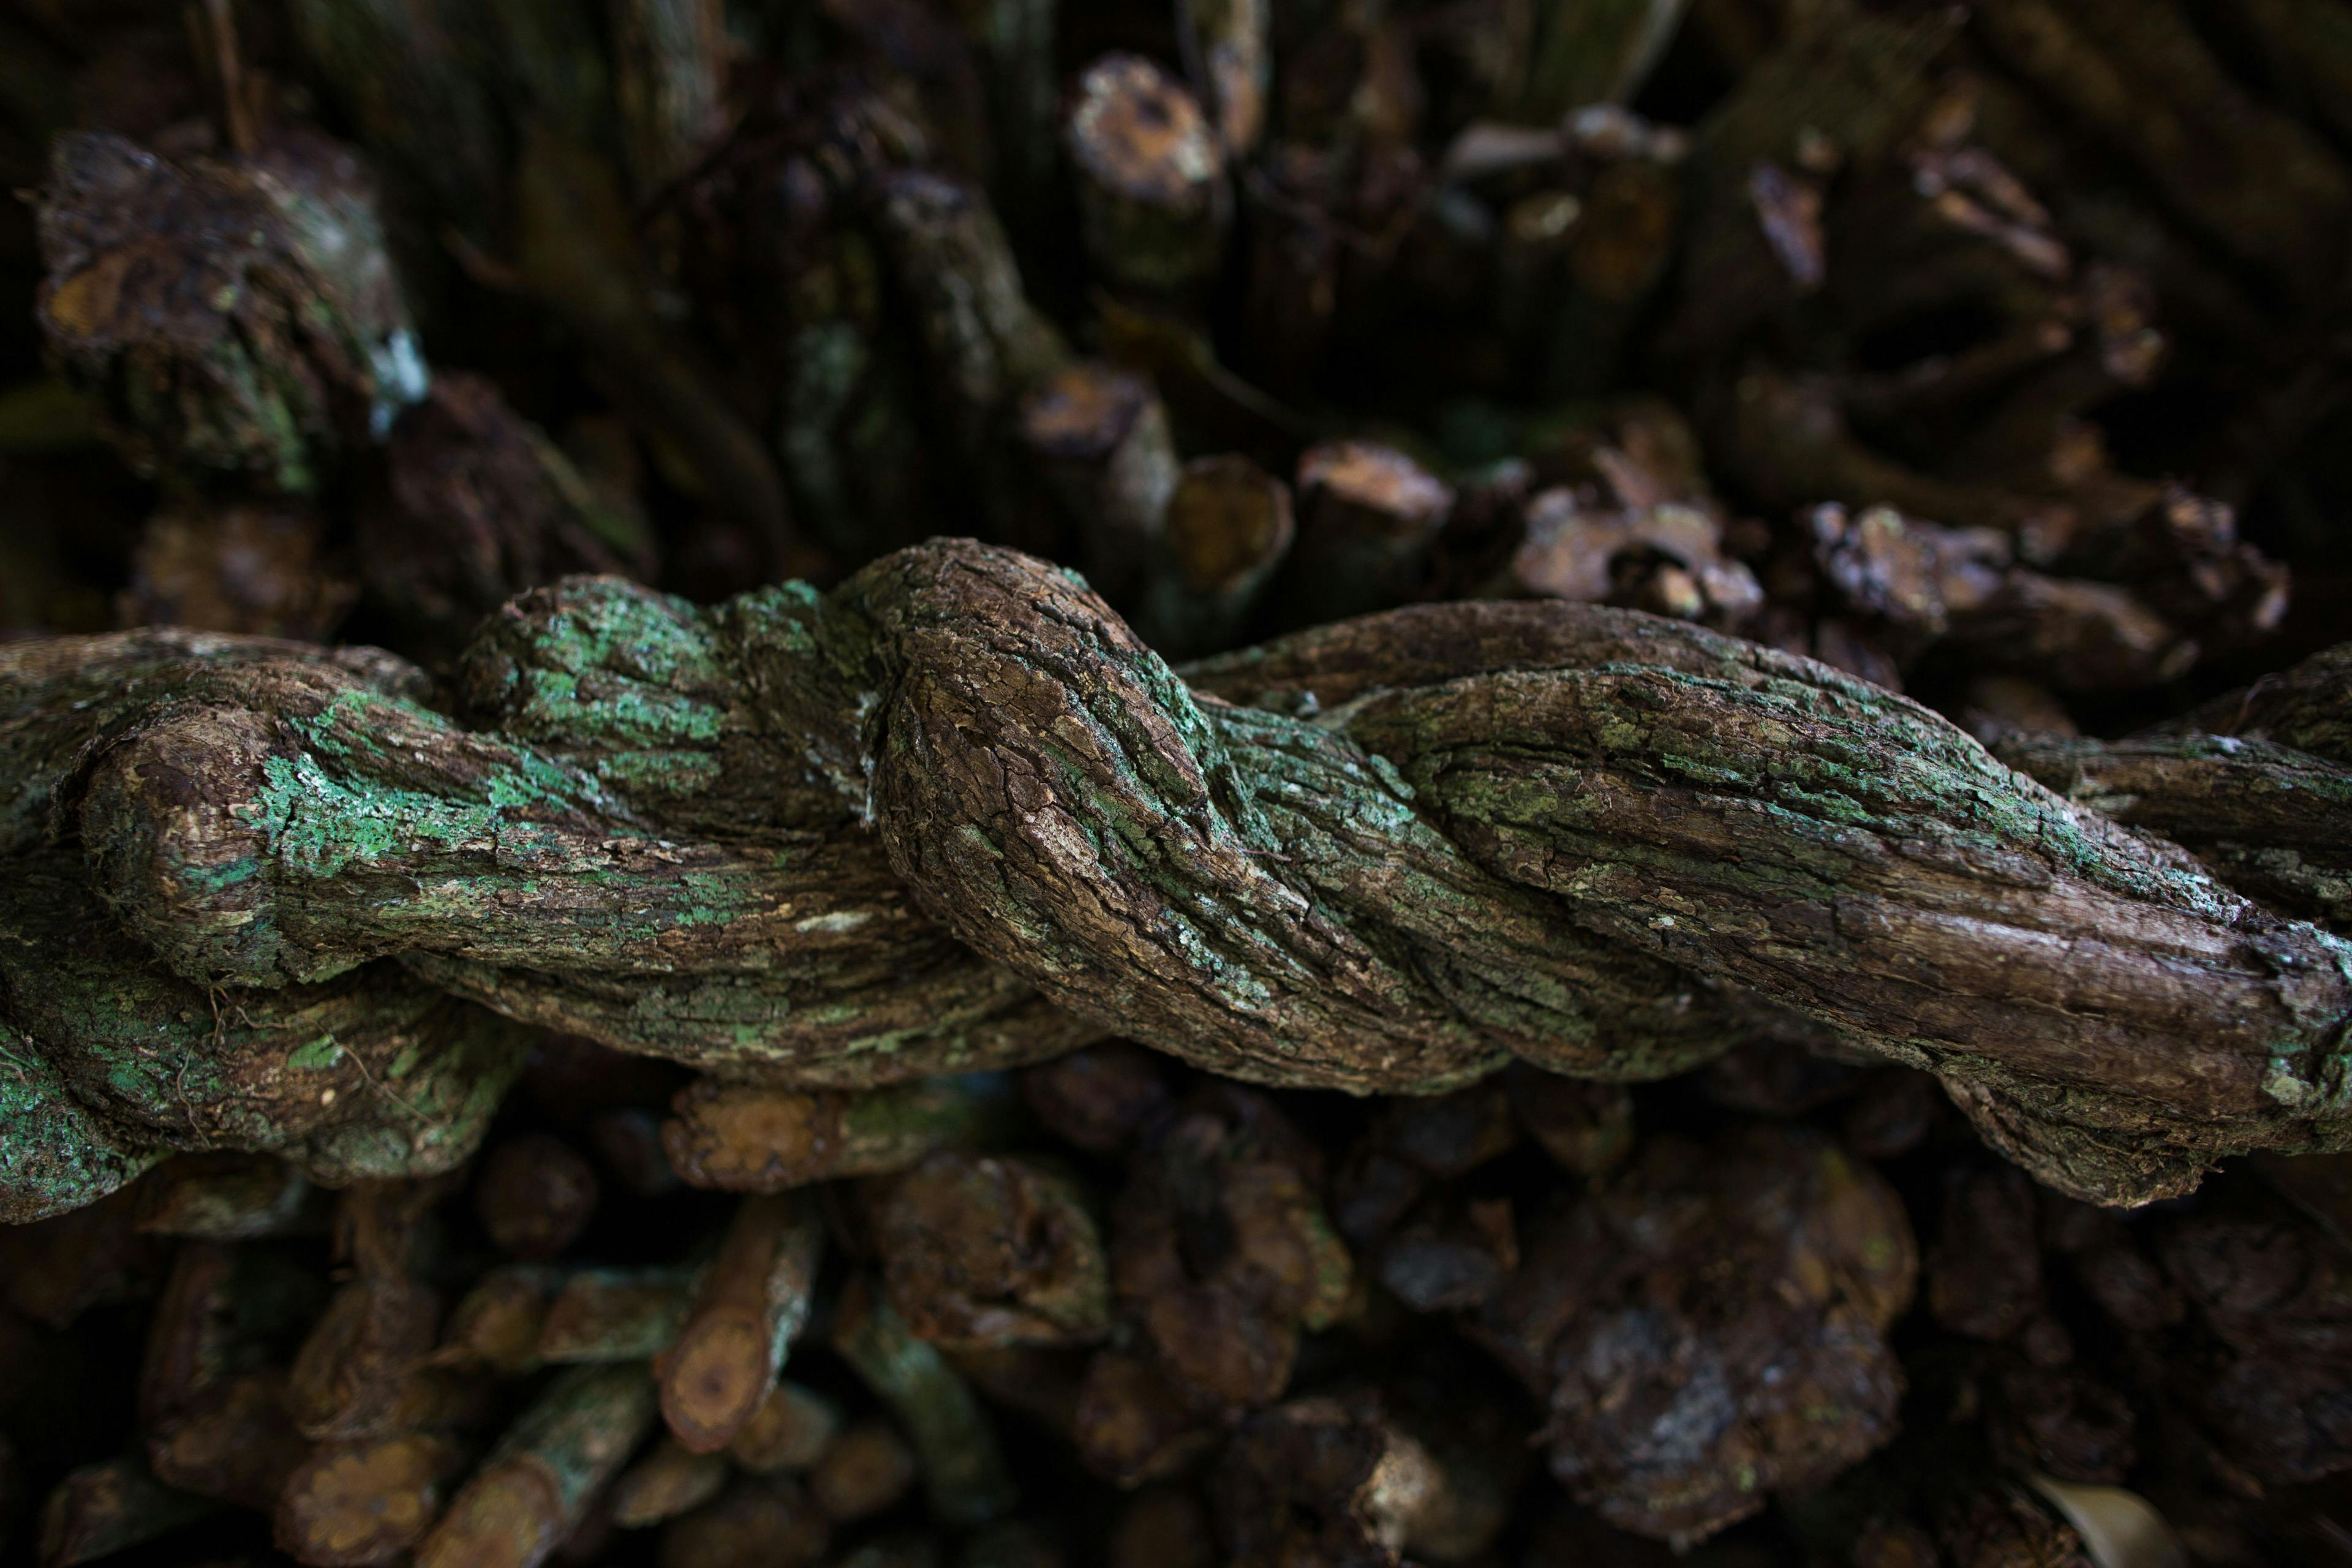 Ayahyasca is most commonly prepared by a decoction of 2 plants from the Amazon region. Image Credit: © Bankerok - Adobe Stock